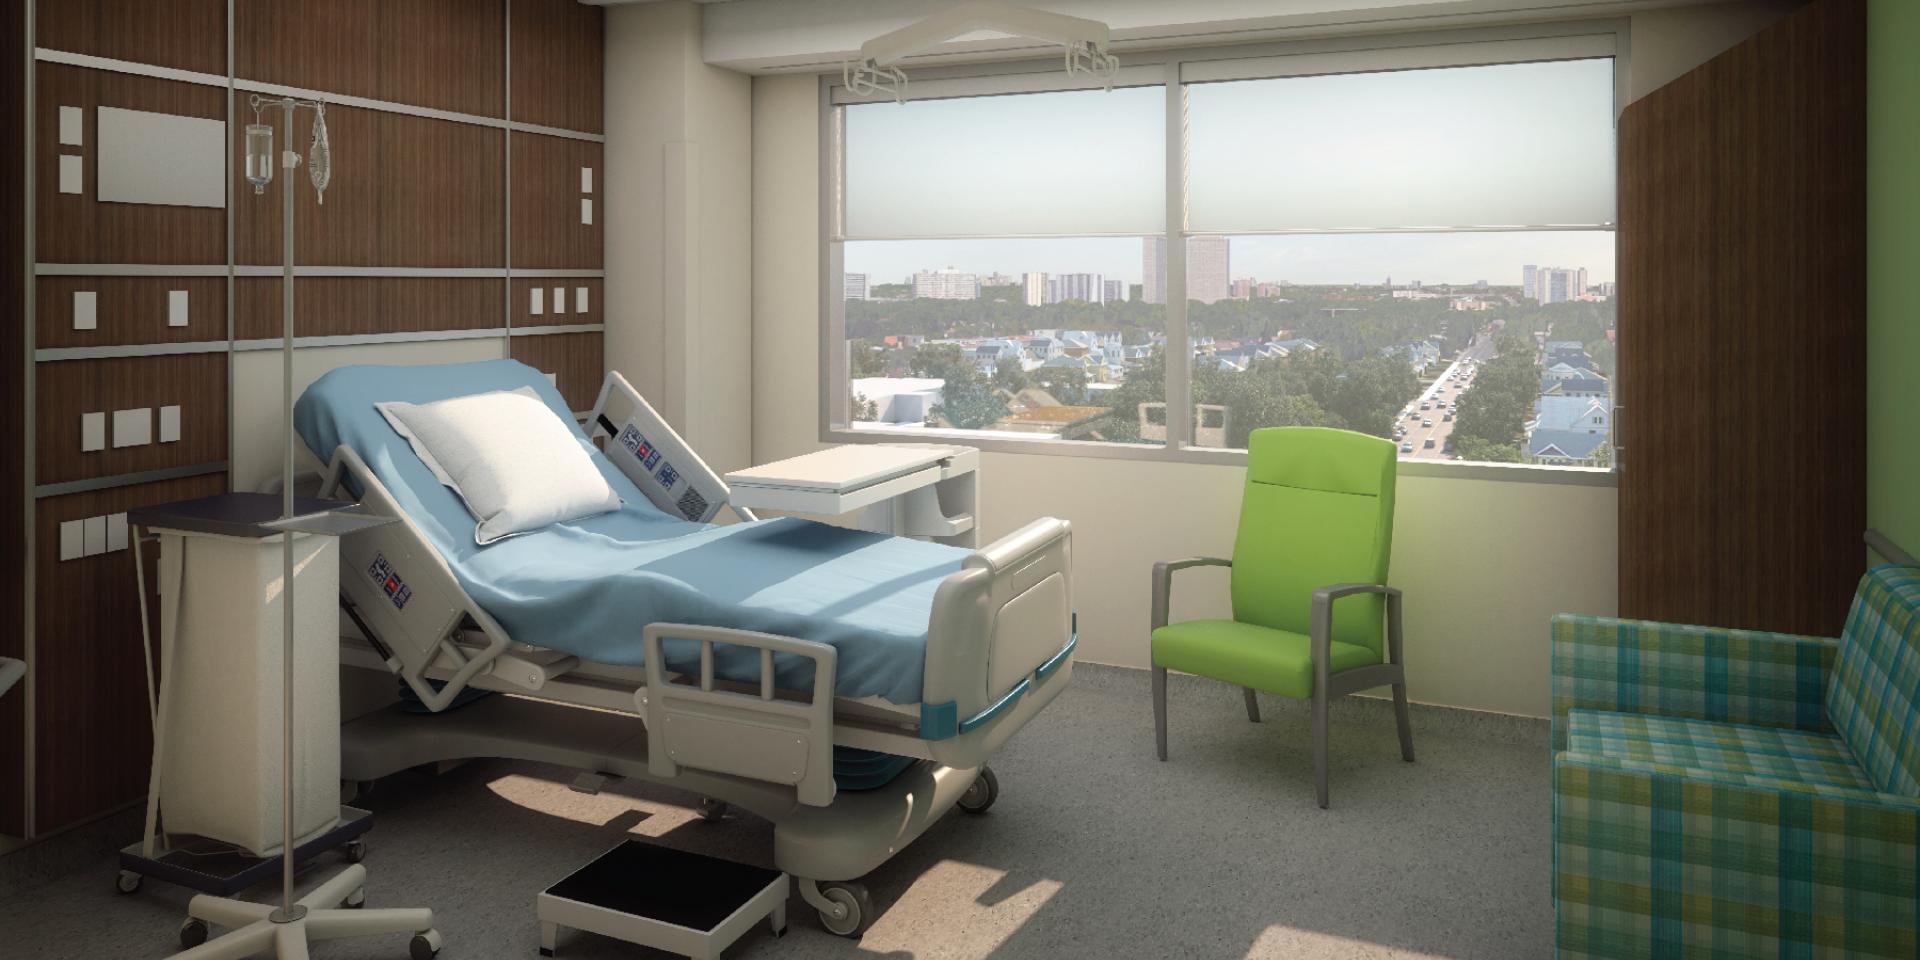 3D rendering of a patient room with a large window streaming in sunlight. It contains a hospital bed, a chair and a couch.